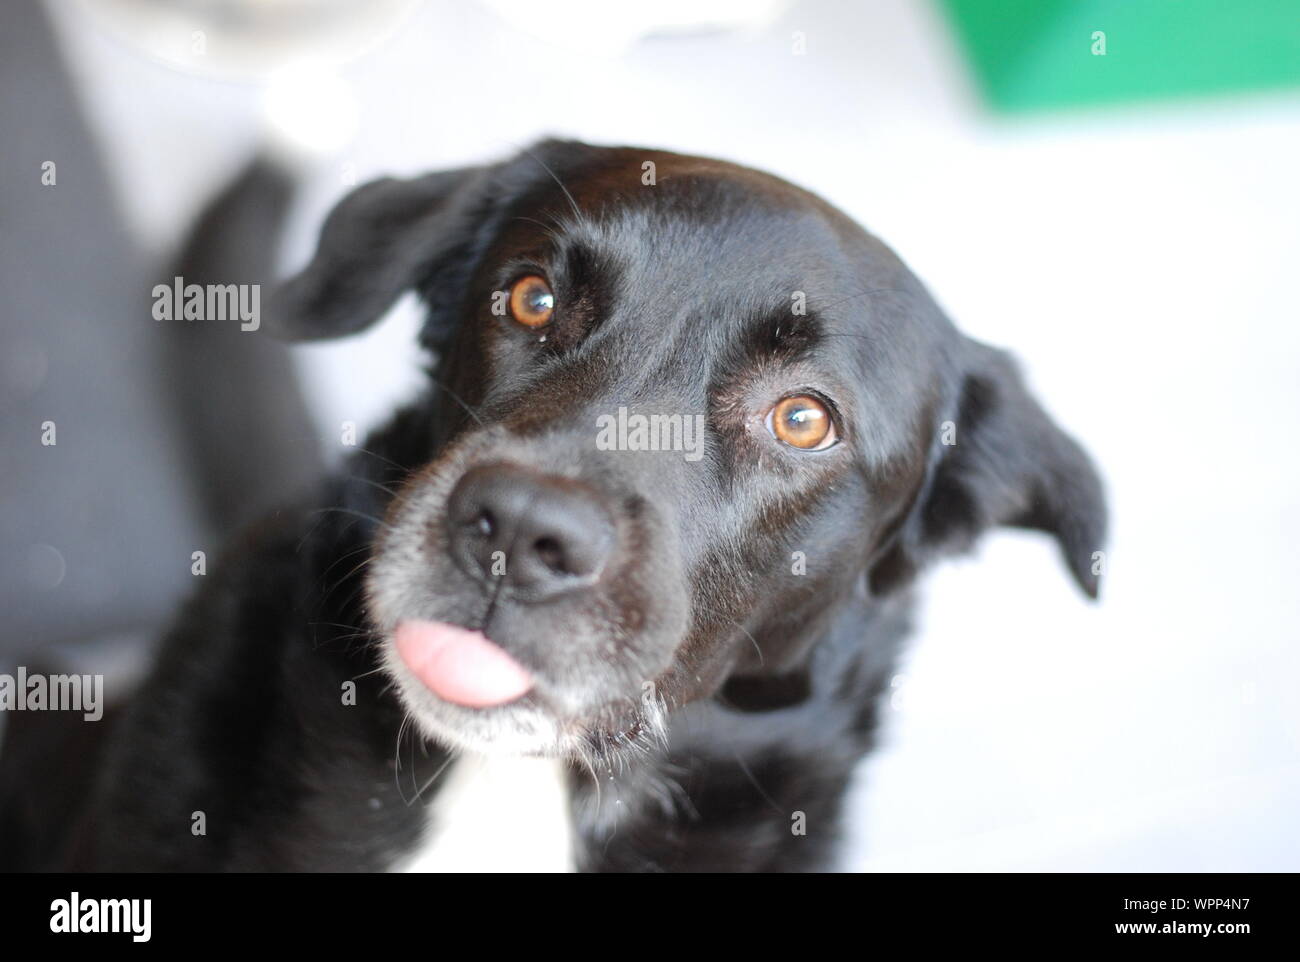 Close-up Of Dog Looking Shocked Stock Photo